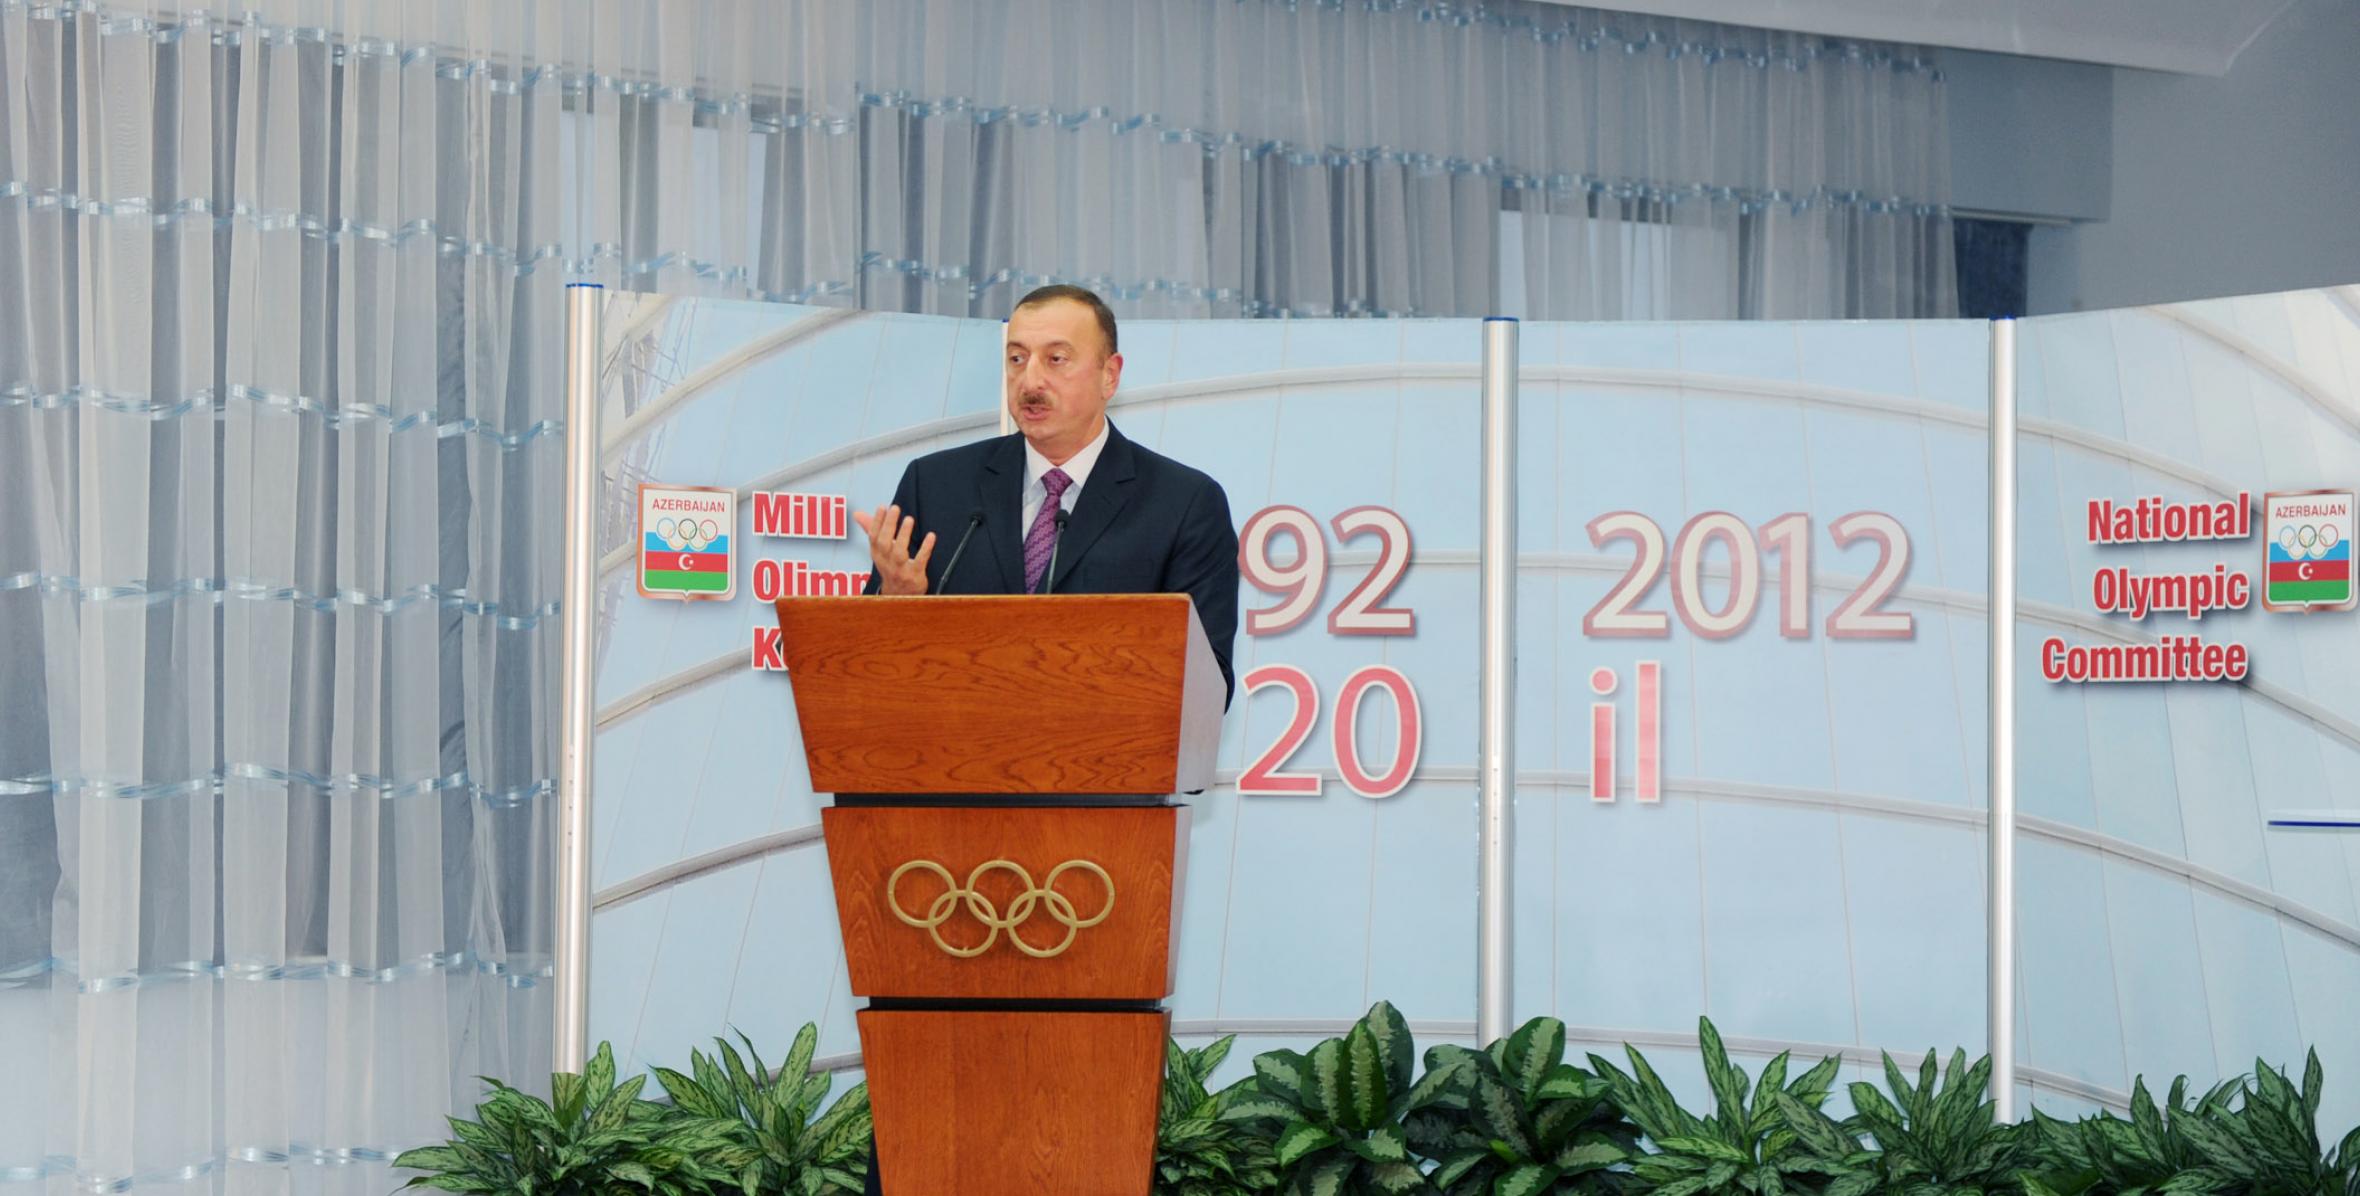 Speech by Ilham Aliyev at the ceremony of awarding sportsmen and coaches at the National Olympic Committee